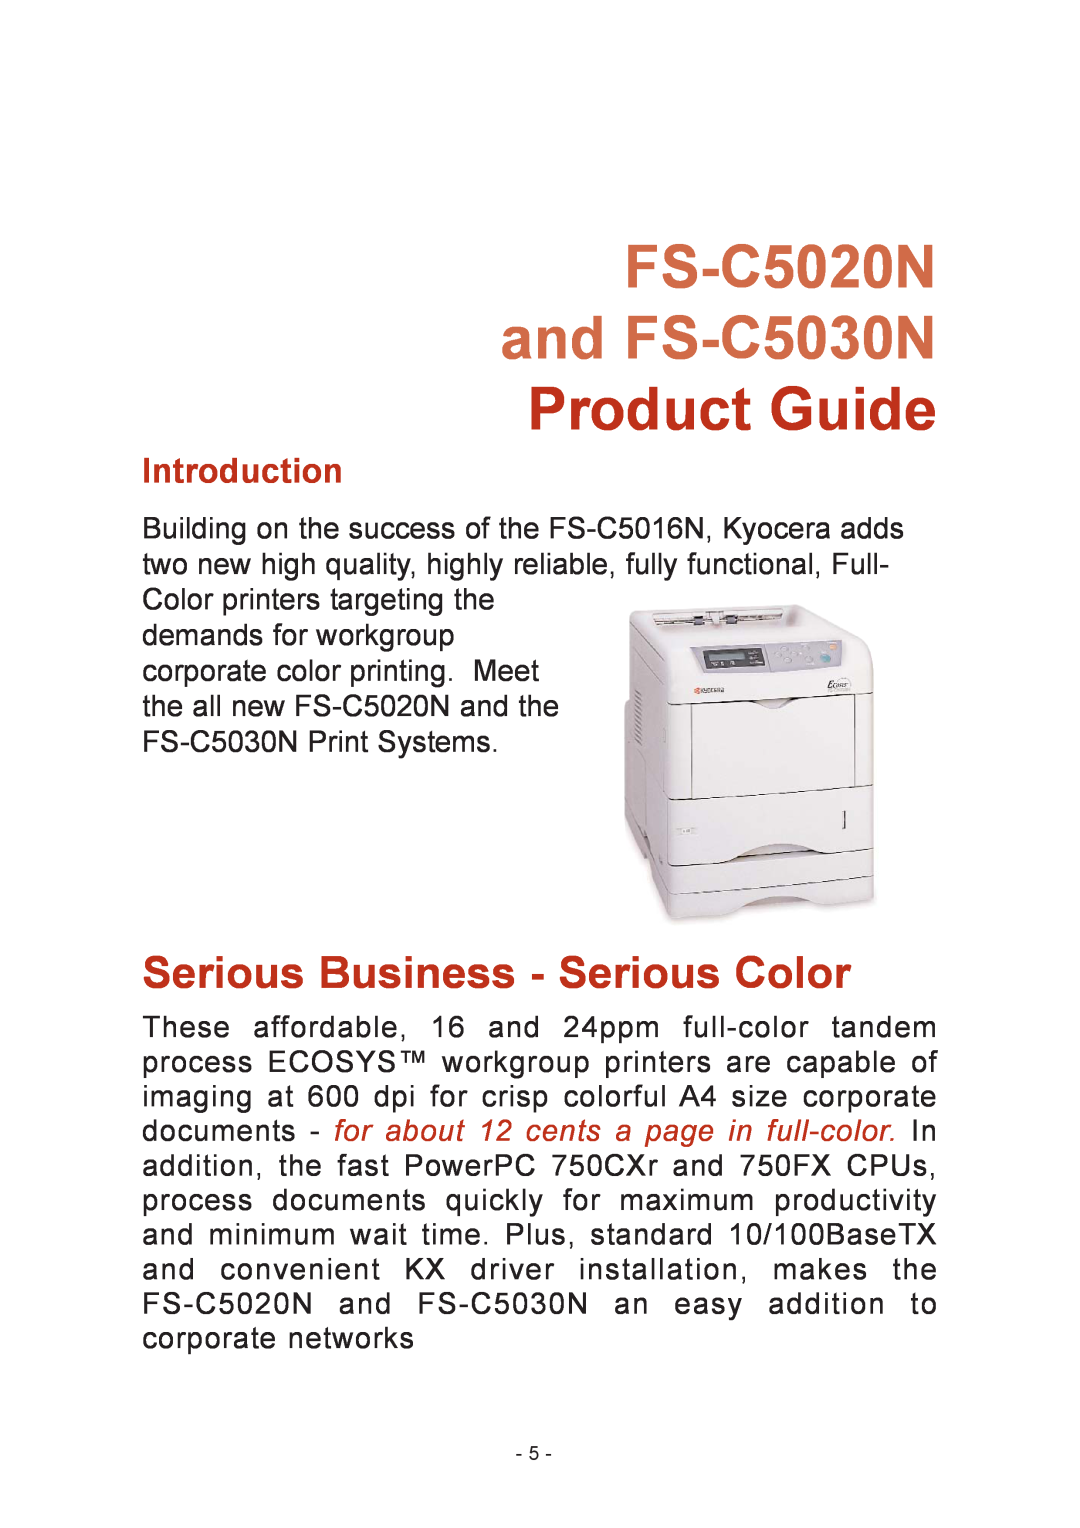 Kyocera manual Product Guide, FS-C5020N and FS-C5030N, Serious Business - Serious Color, Introduction 